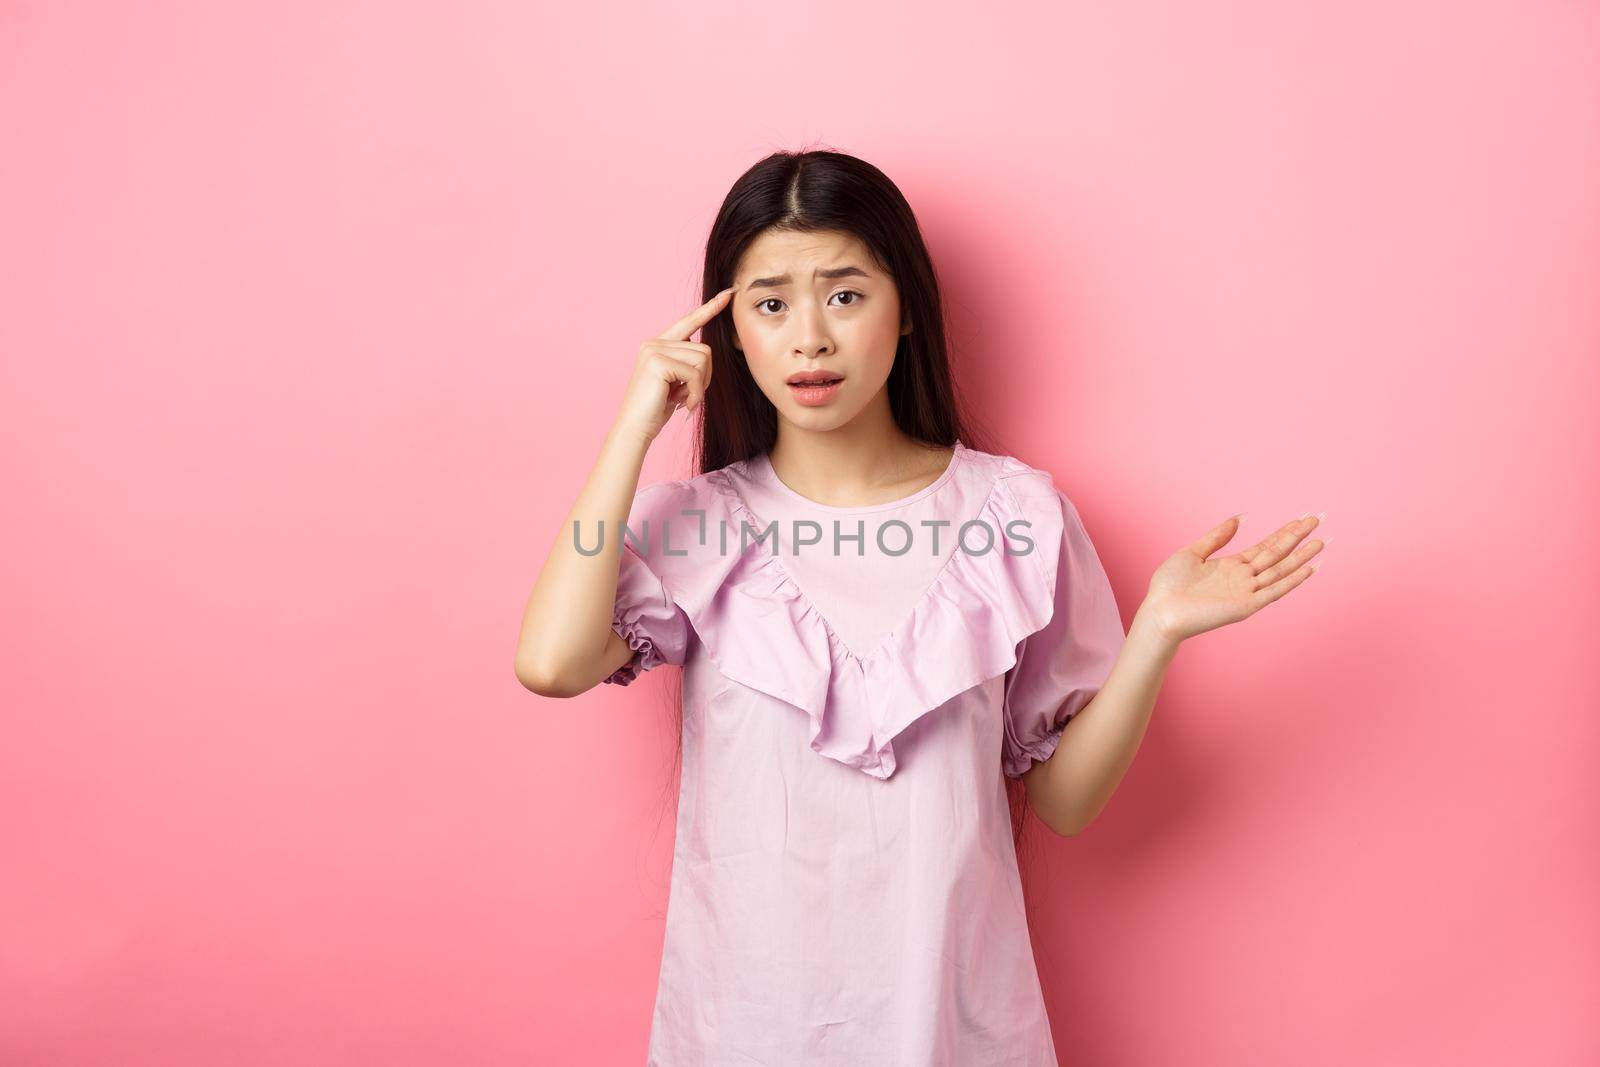 Are you crazy. Shocked asian woman pointing at head temple and complaining someone stupid action, scolding person, standing against pink background.